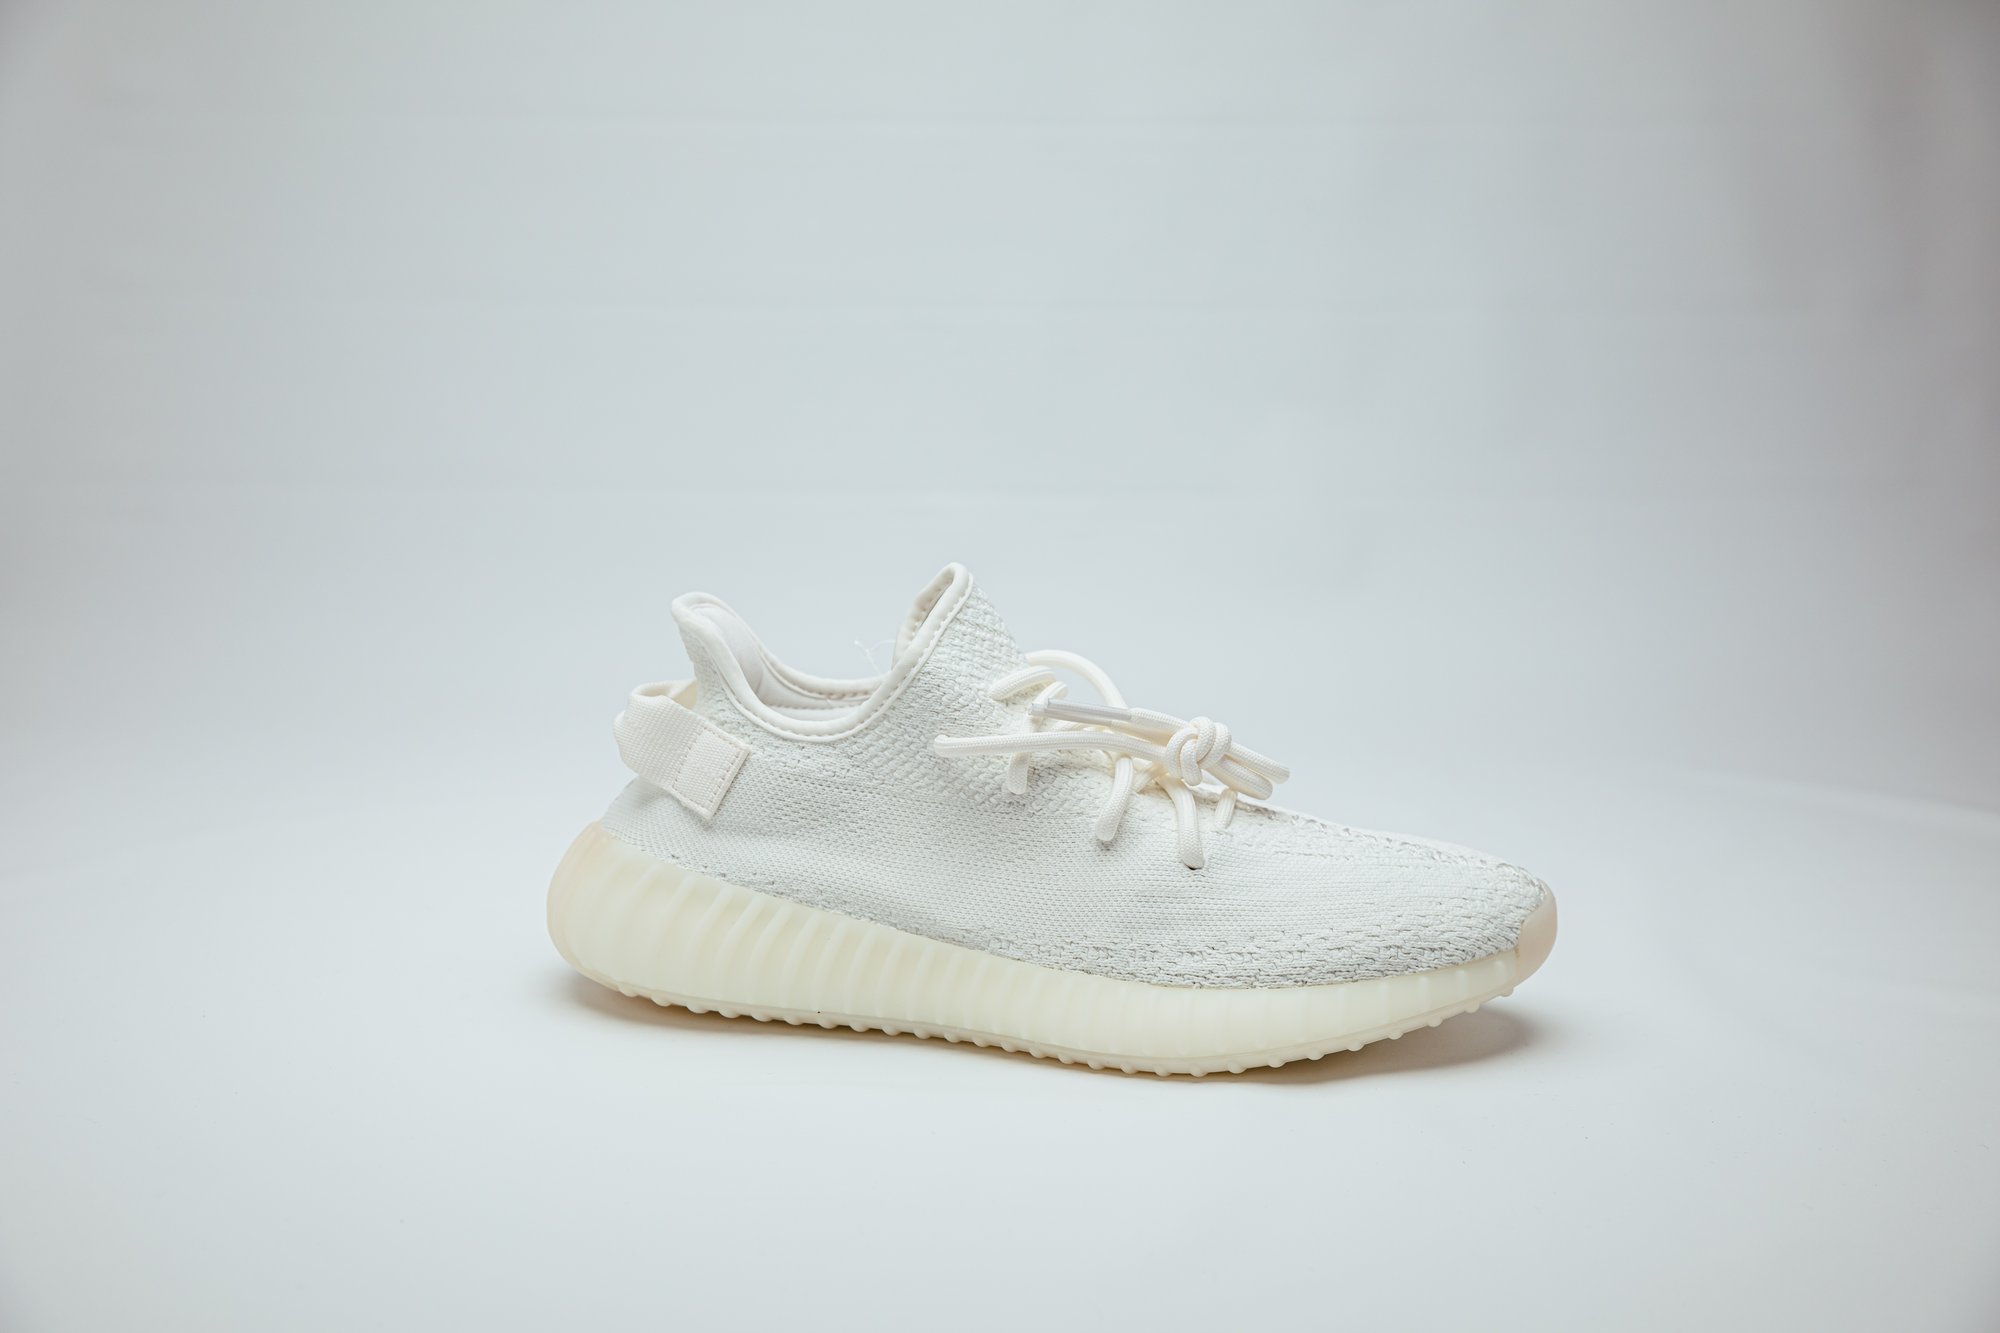 Cheap Adidas Yeezy Boost 350 V2 Sesame Used F99710 Sz 5 Ships Today